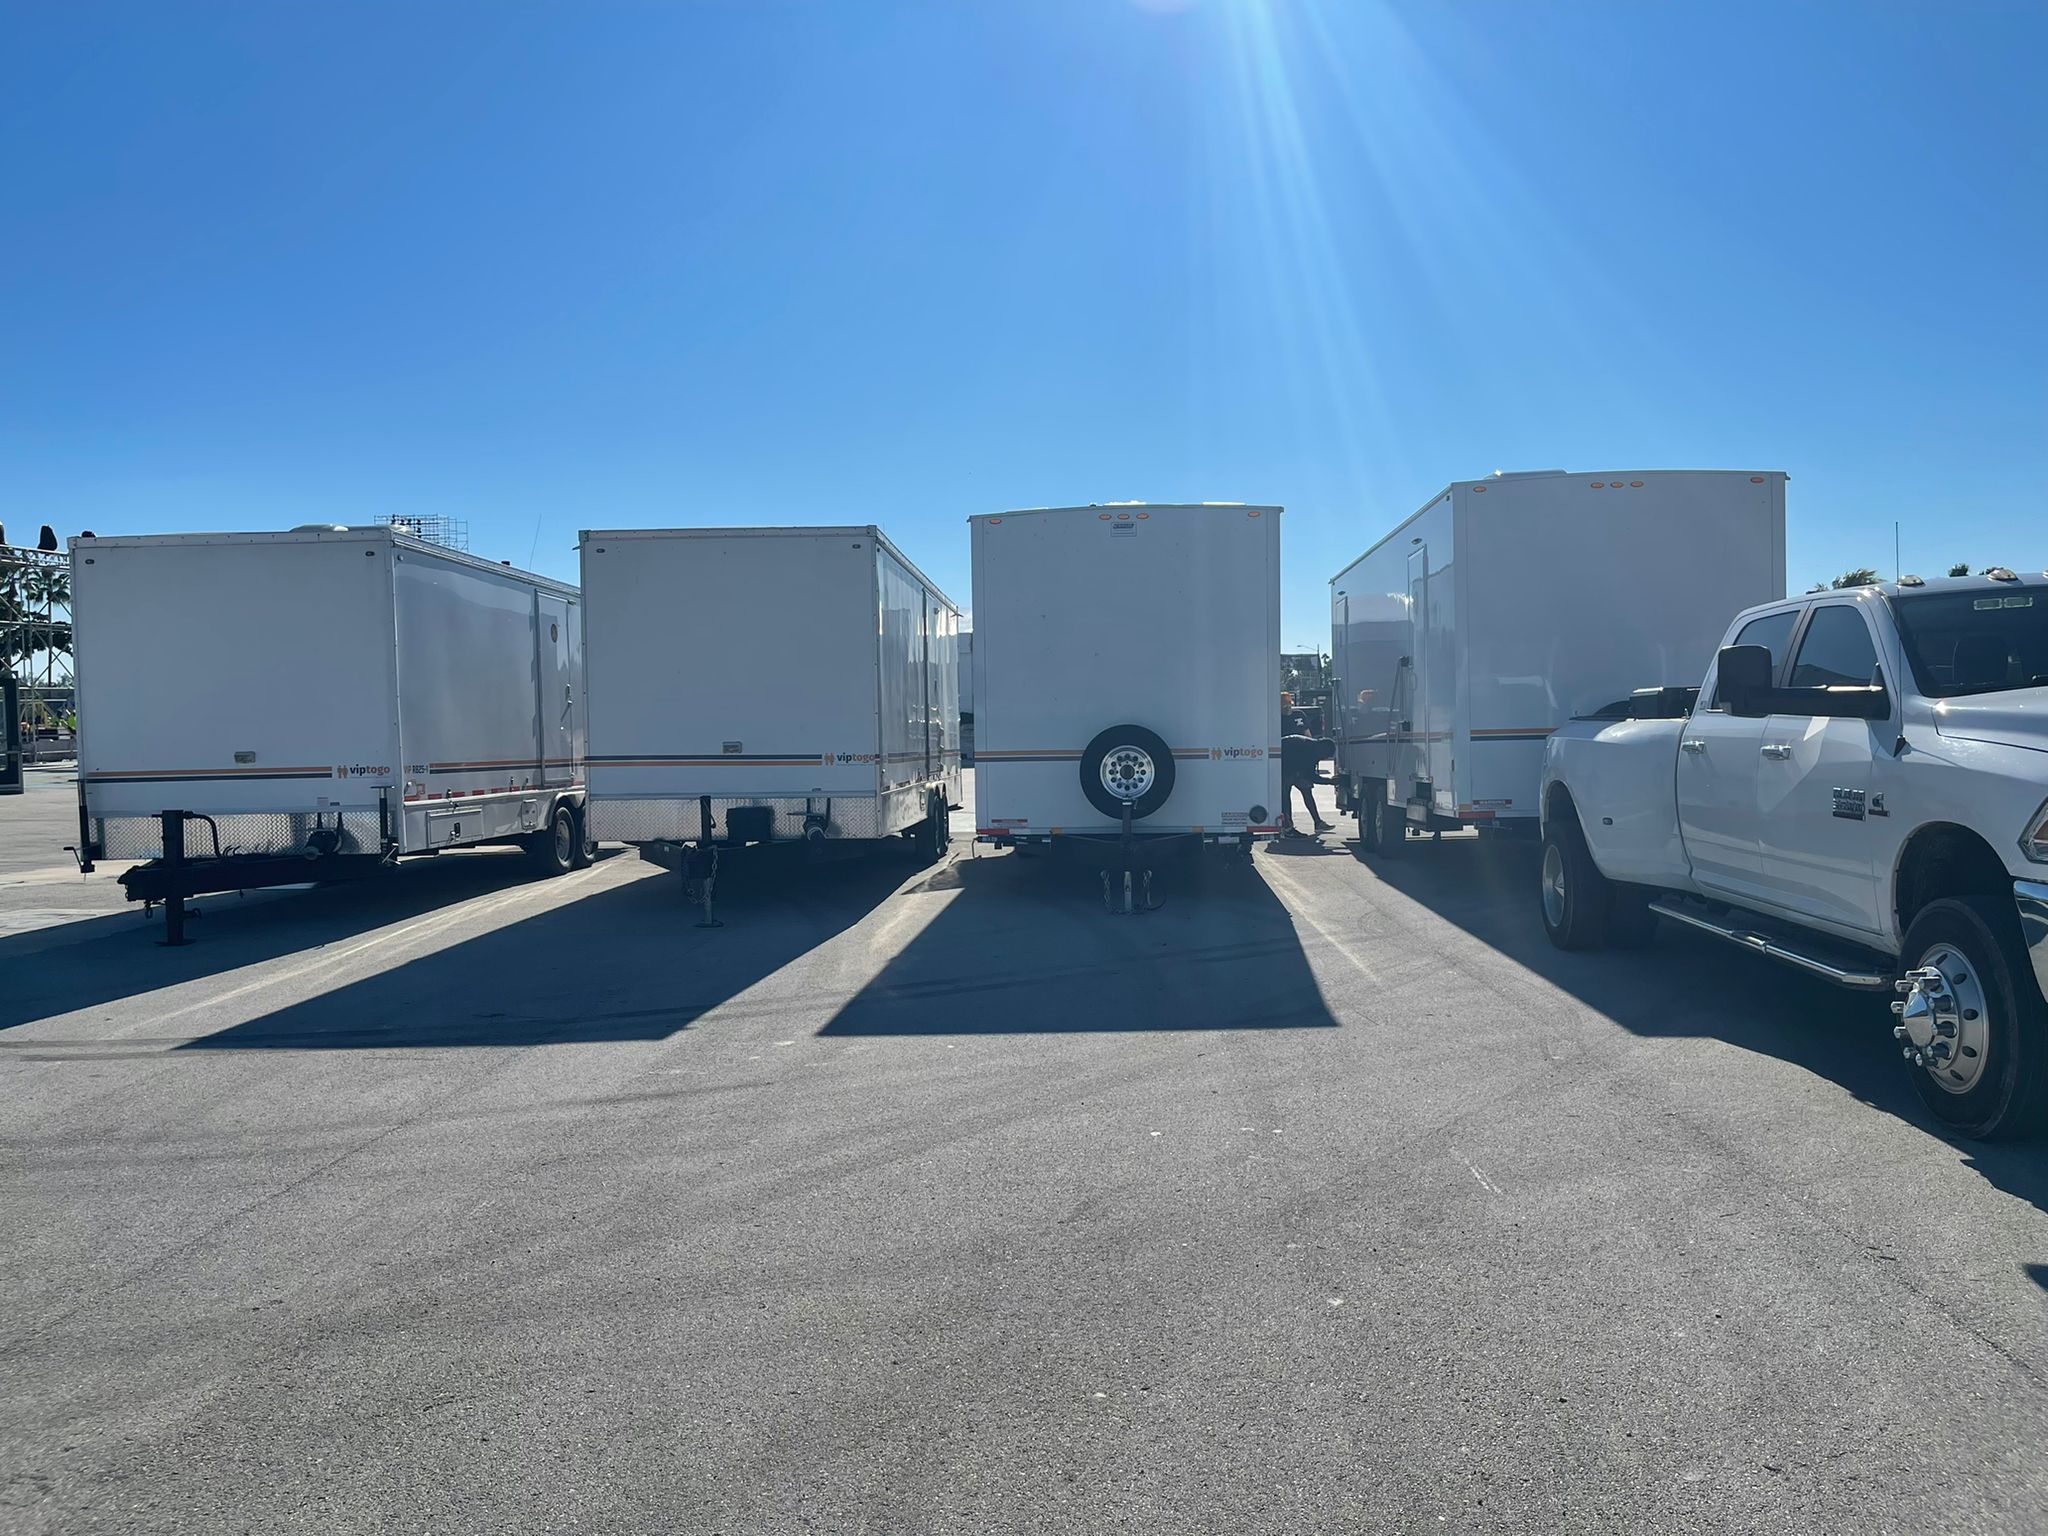 Large Restroom Trailers, in Parking Lot, in Florida